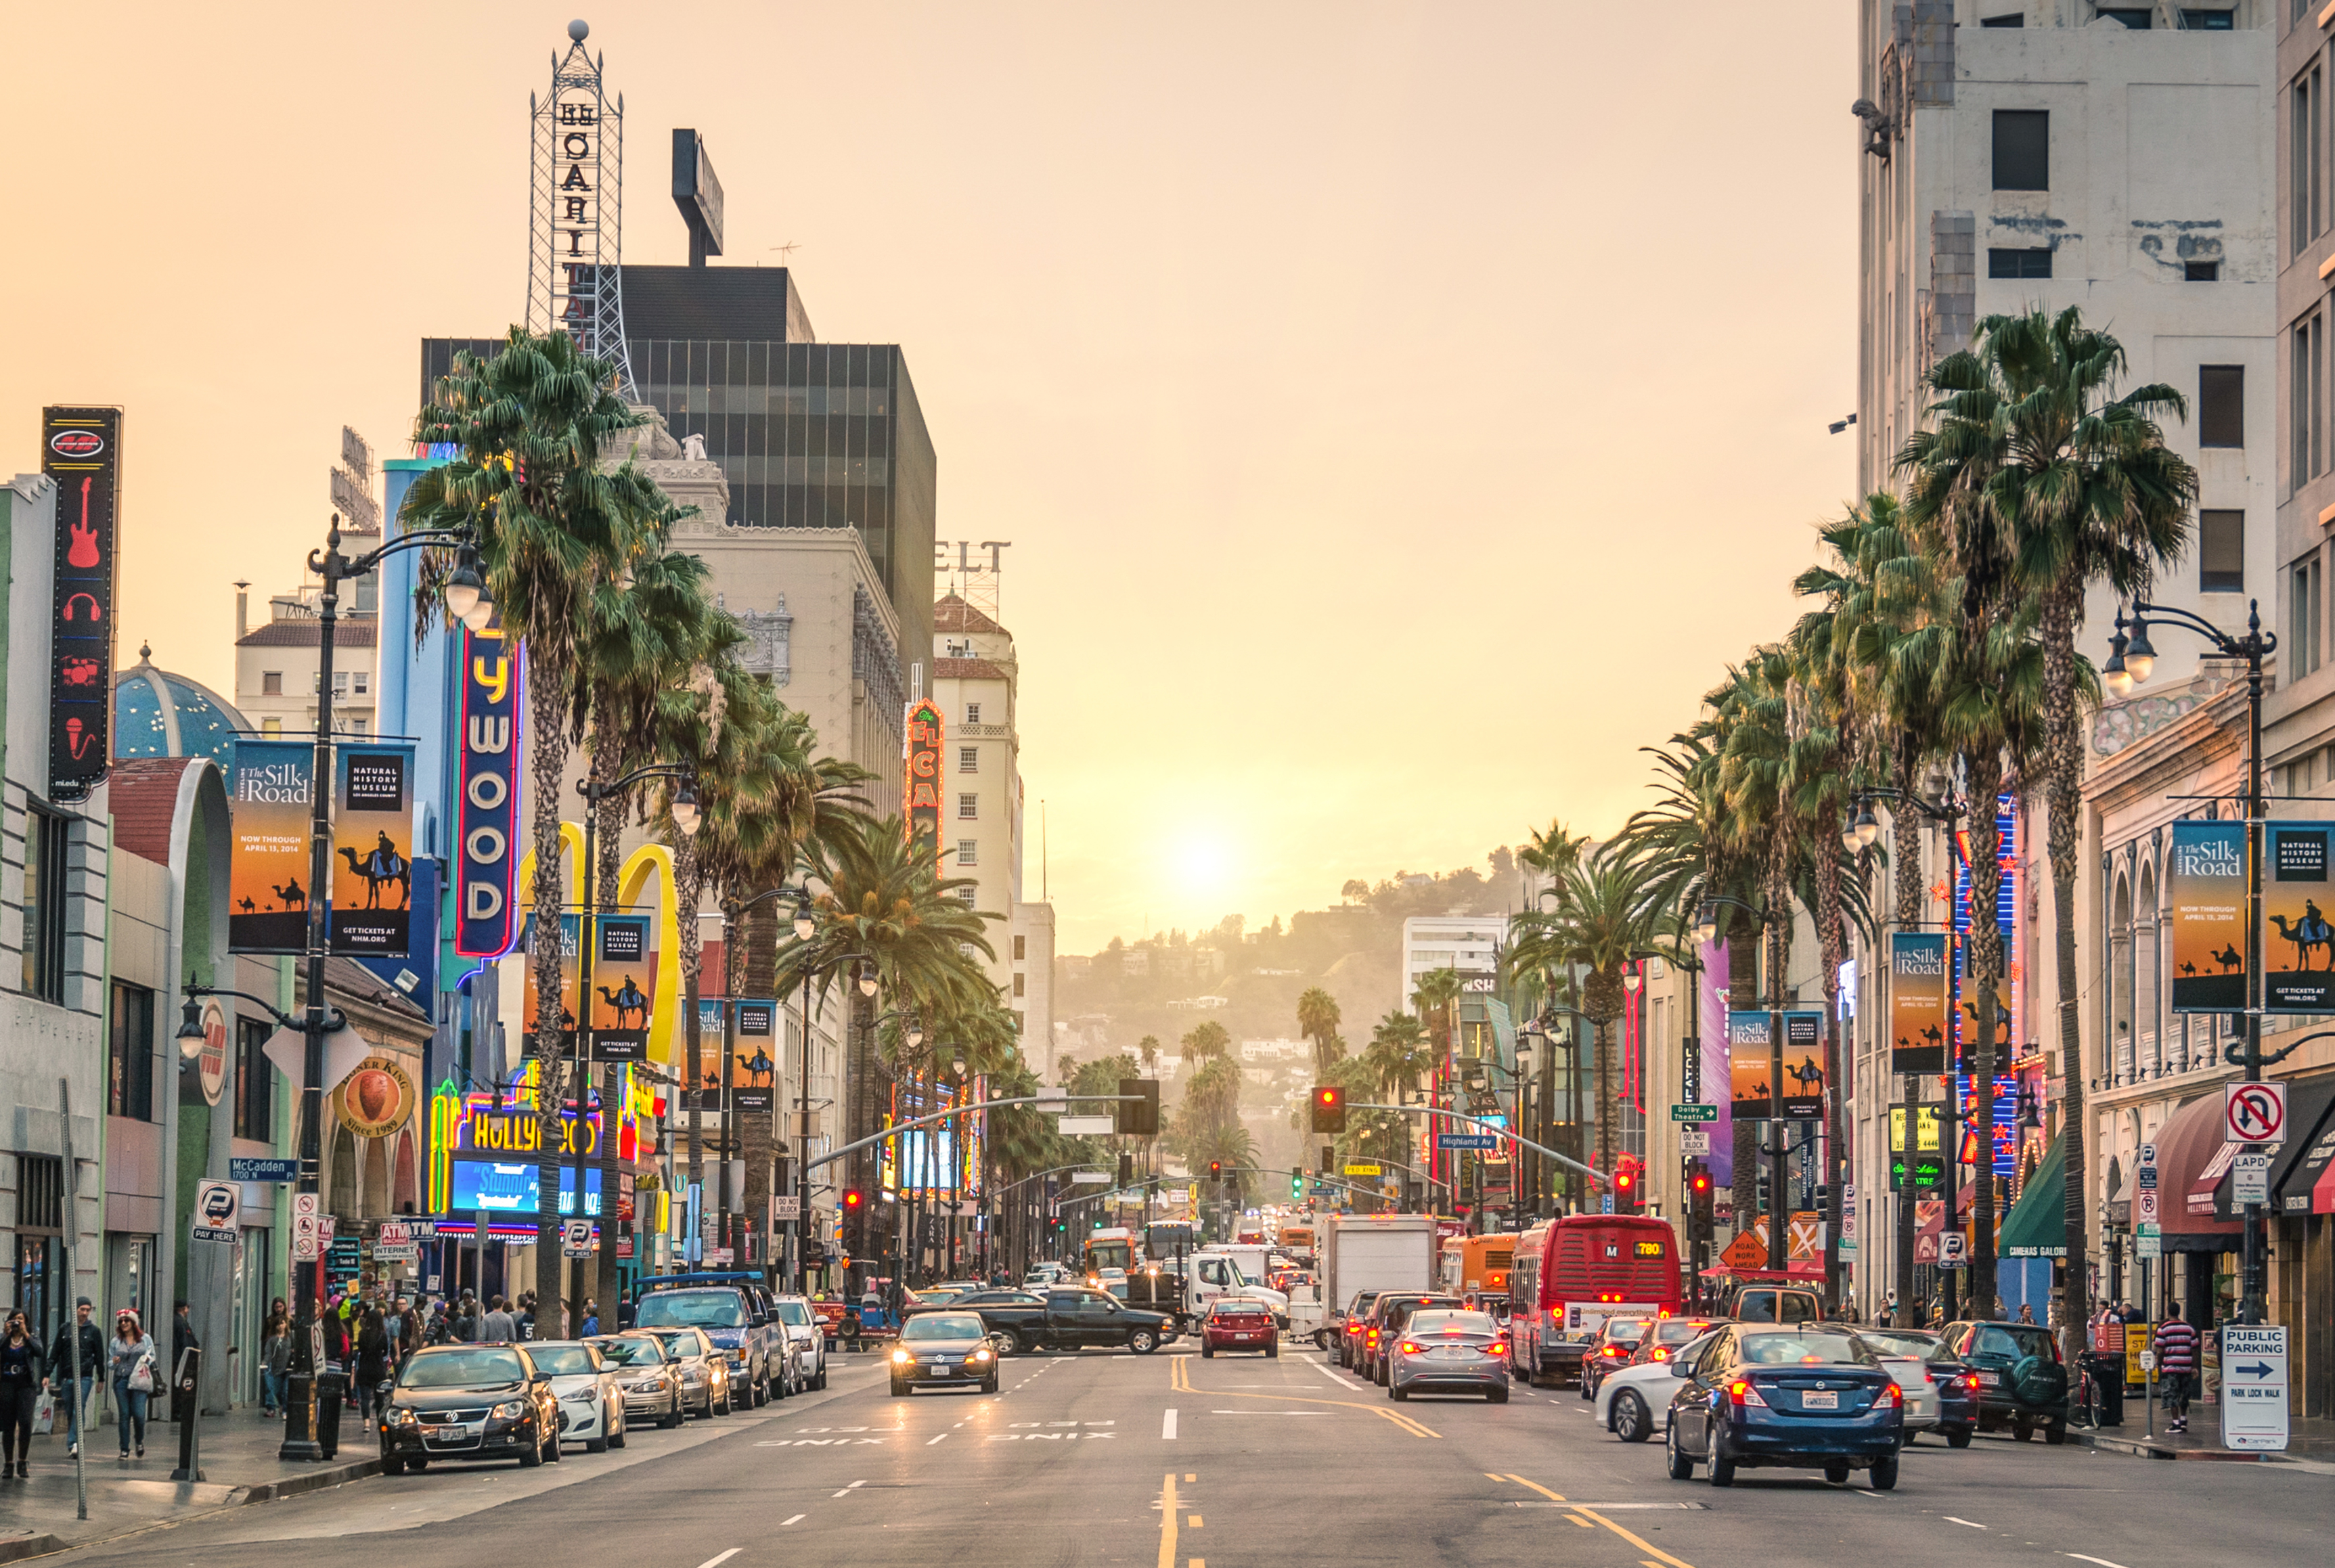 Flights to Los Angeles from $125 round-trip